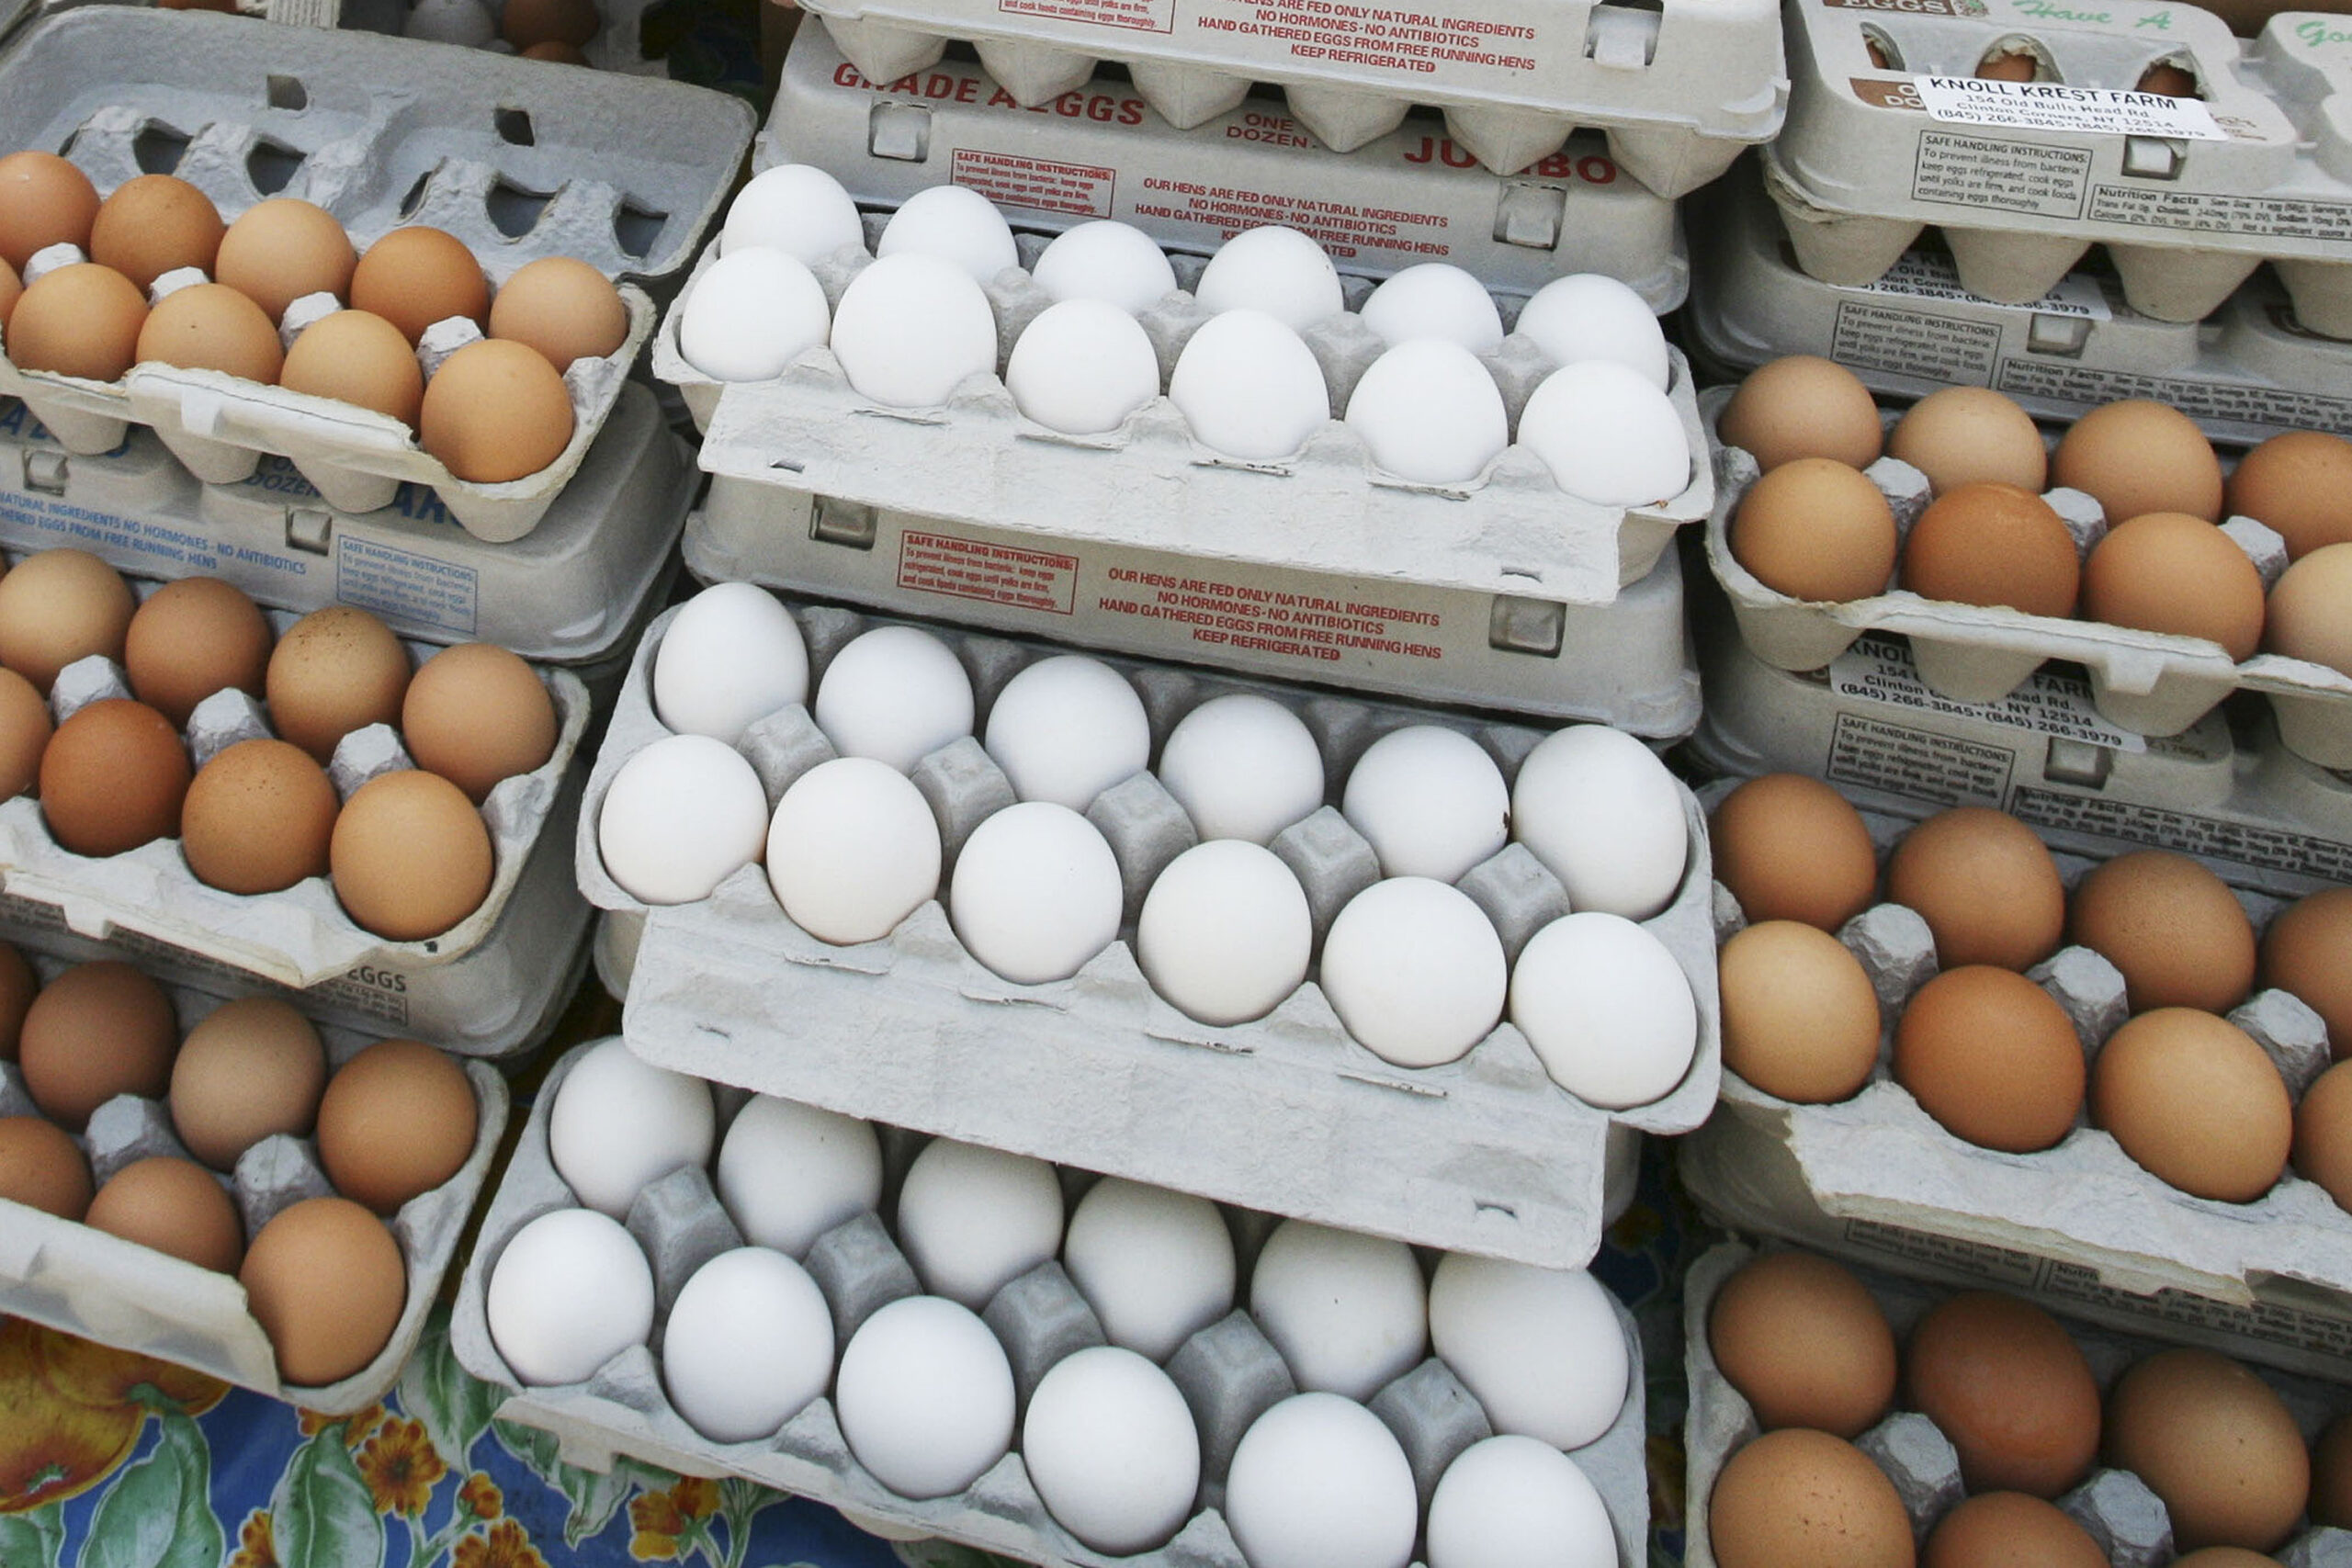 Cartons of eggs are displayed for sale.